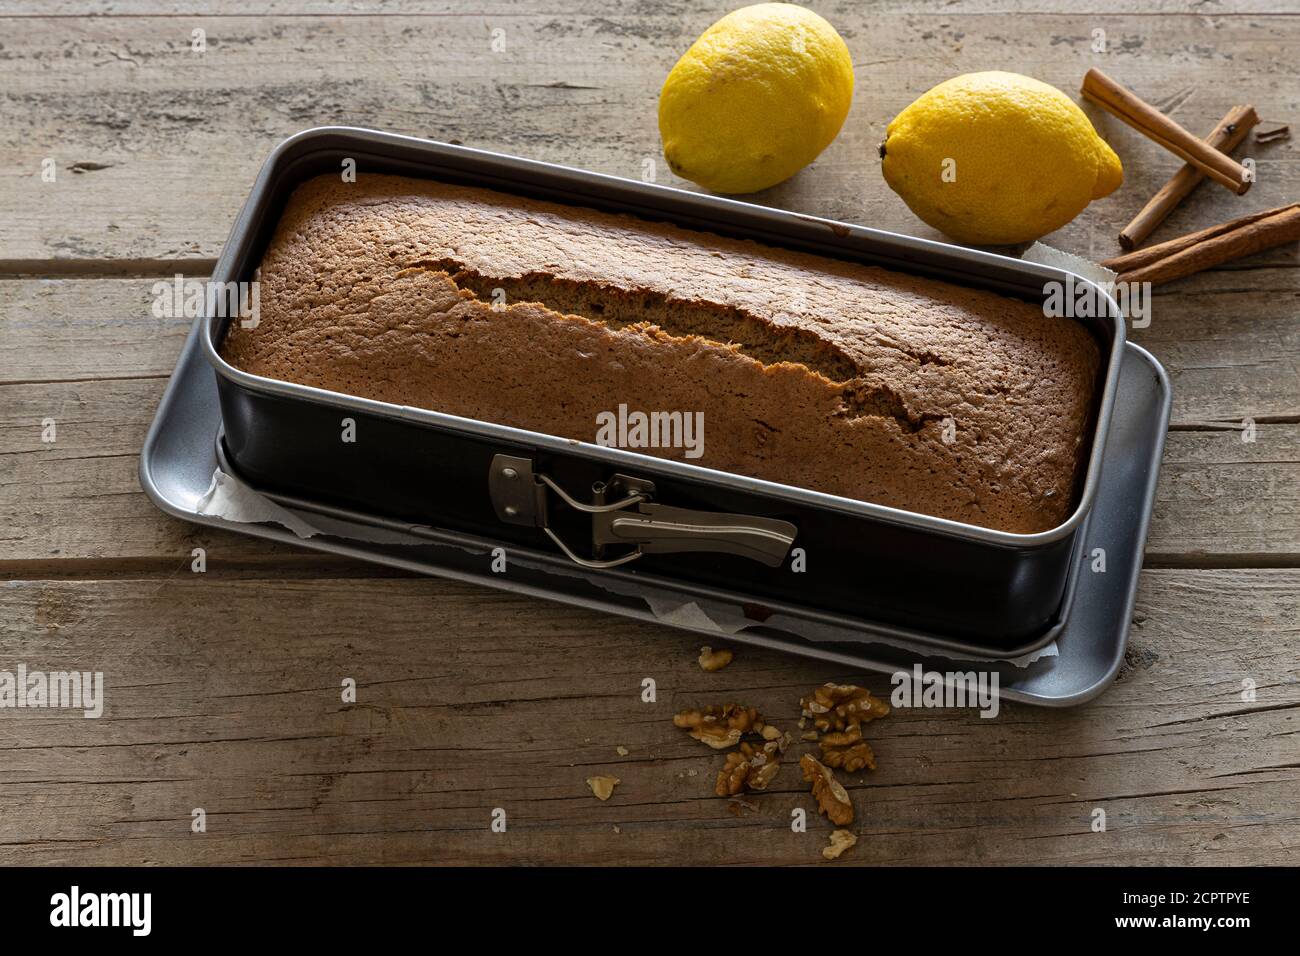 Hot homemade cake straight from the oven in a baking tin surrounded by lemon, cinnamon, and walnuts and placed on a vintage wooden table. Stock Photo